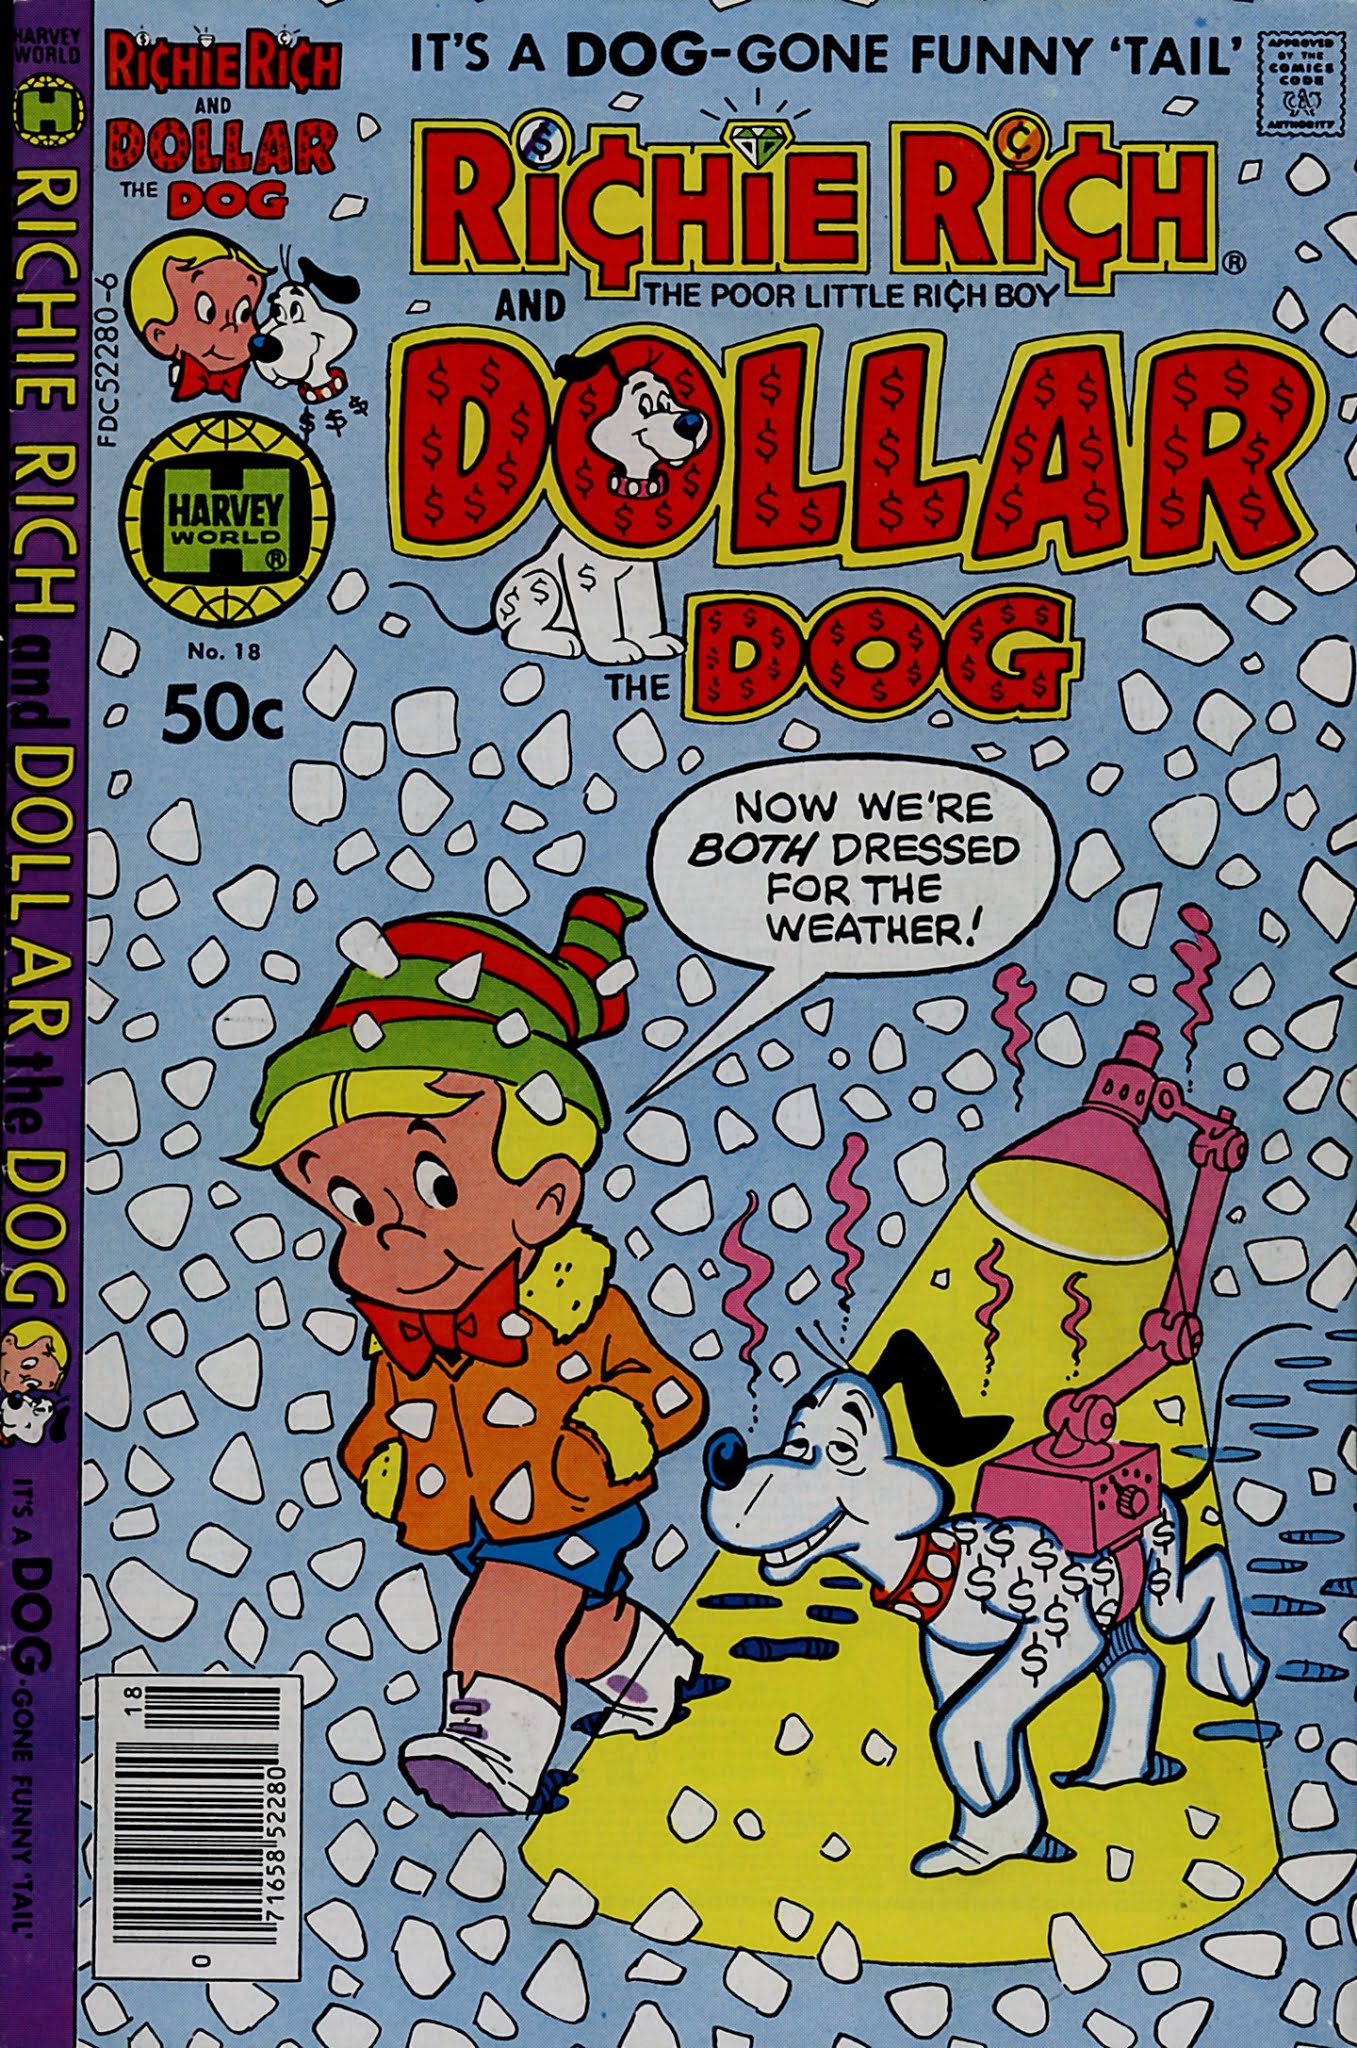 Read online Richie Rich & Dollar the Dog comic -  Issue #18 - 1